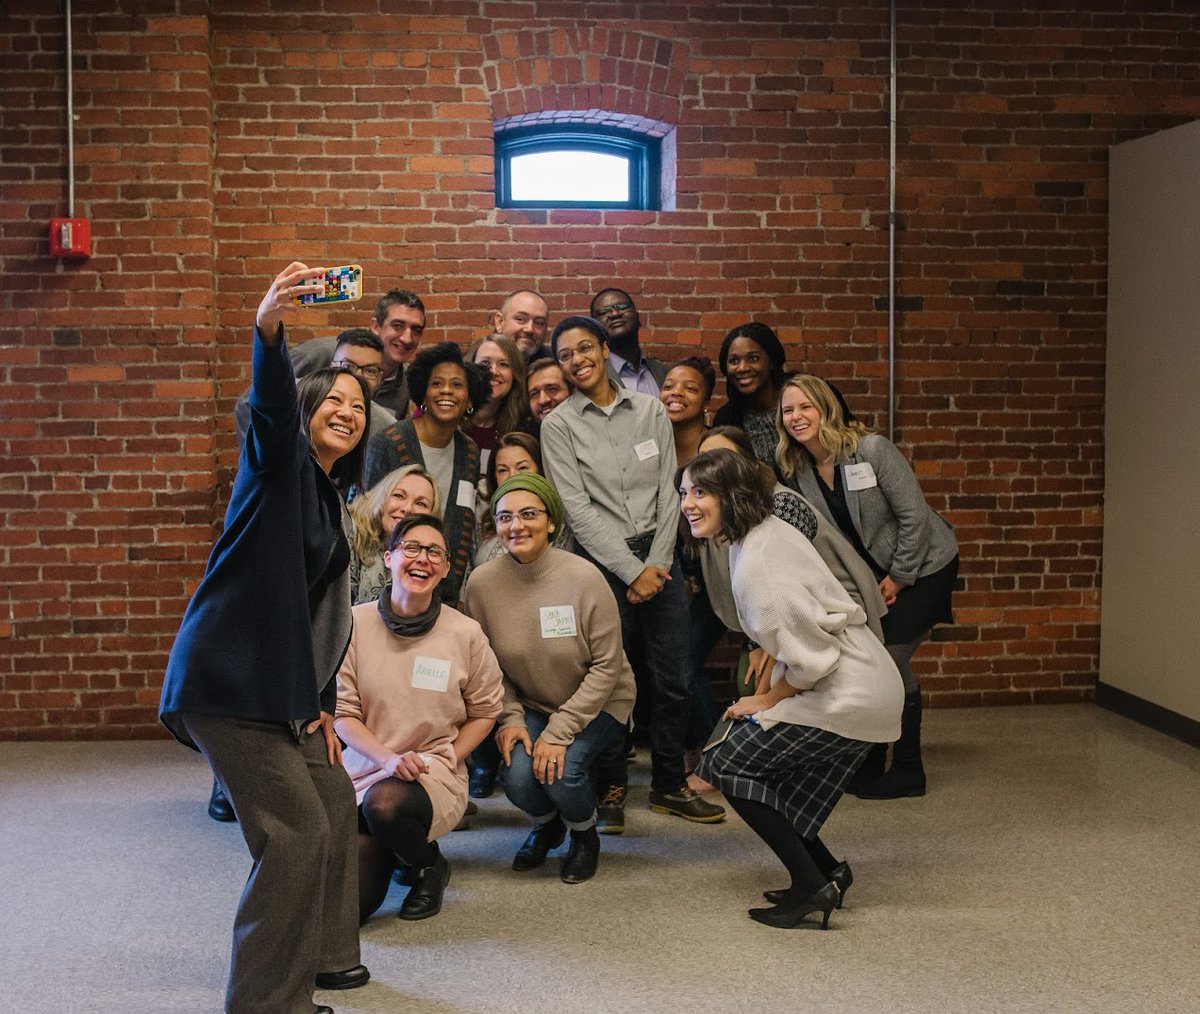 ⚡Spread the word: we're hiring! Remake Learning Days is seeking an independent contractor to support the team and manage logistics for Remake Learning Days Across PA. See the full contract description here: remakelearning.org/opportunity/20…